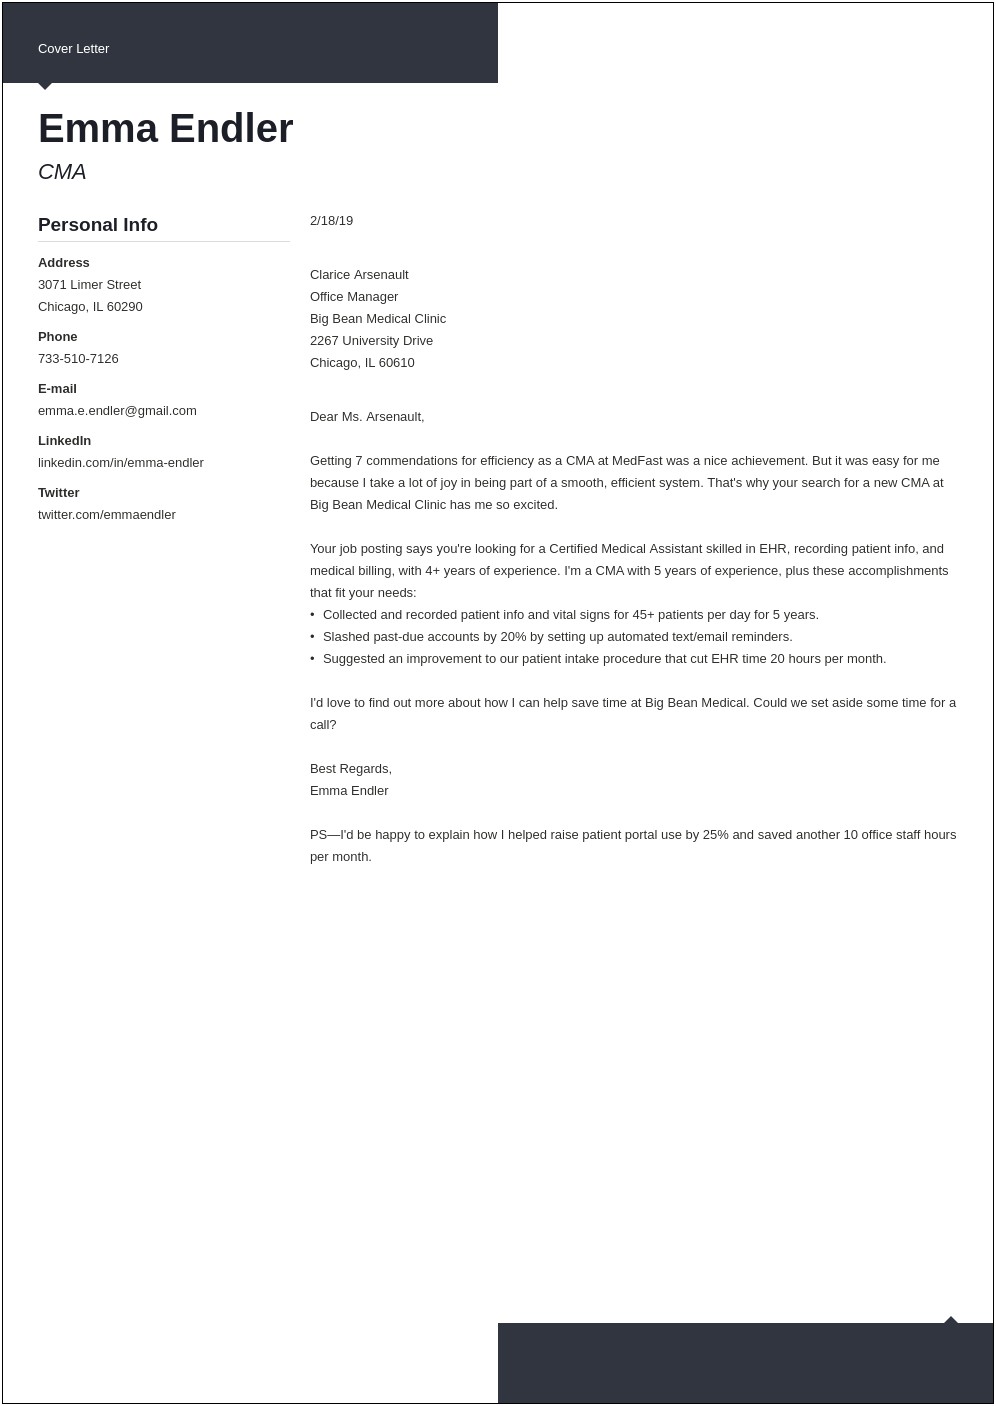 Example Of A Short Cover Letter Resume